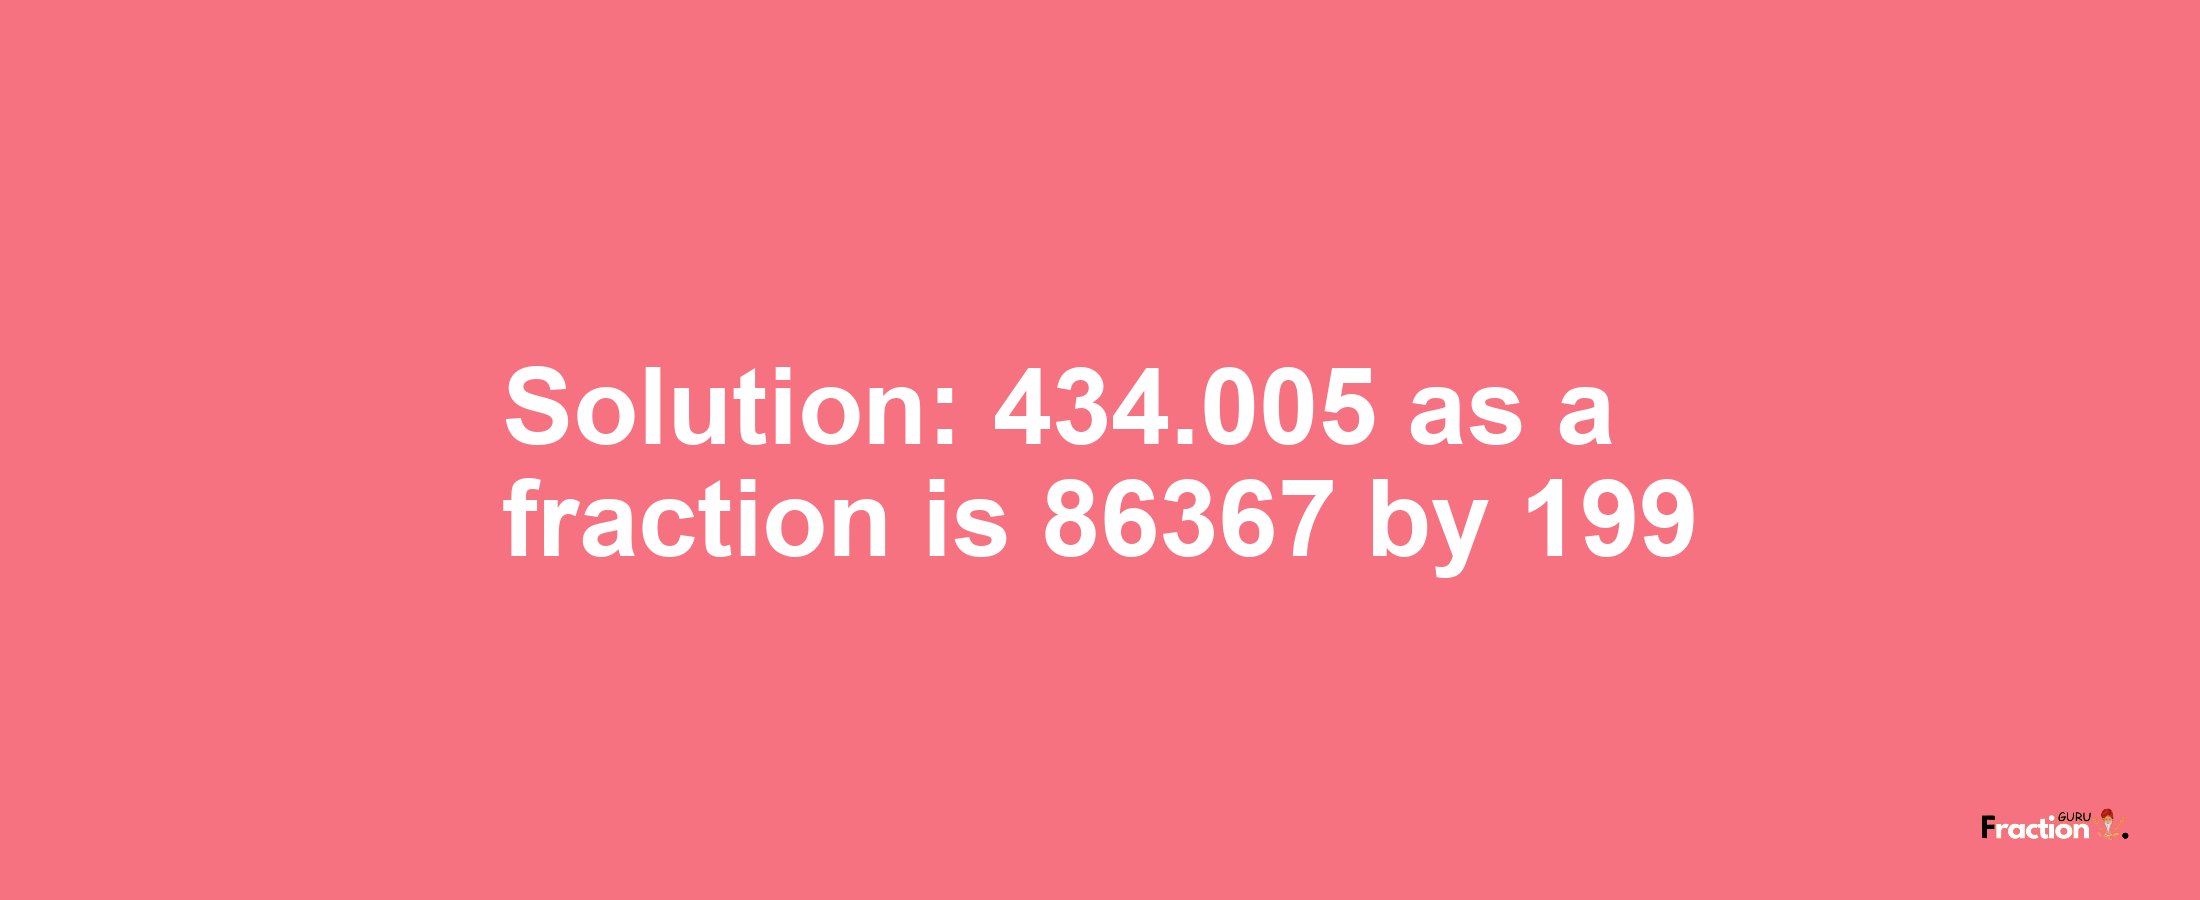 Solution:434.005 as a fraction is 86367/199